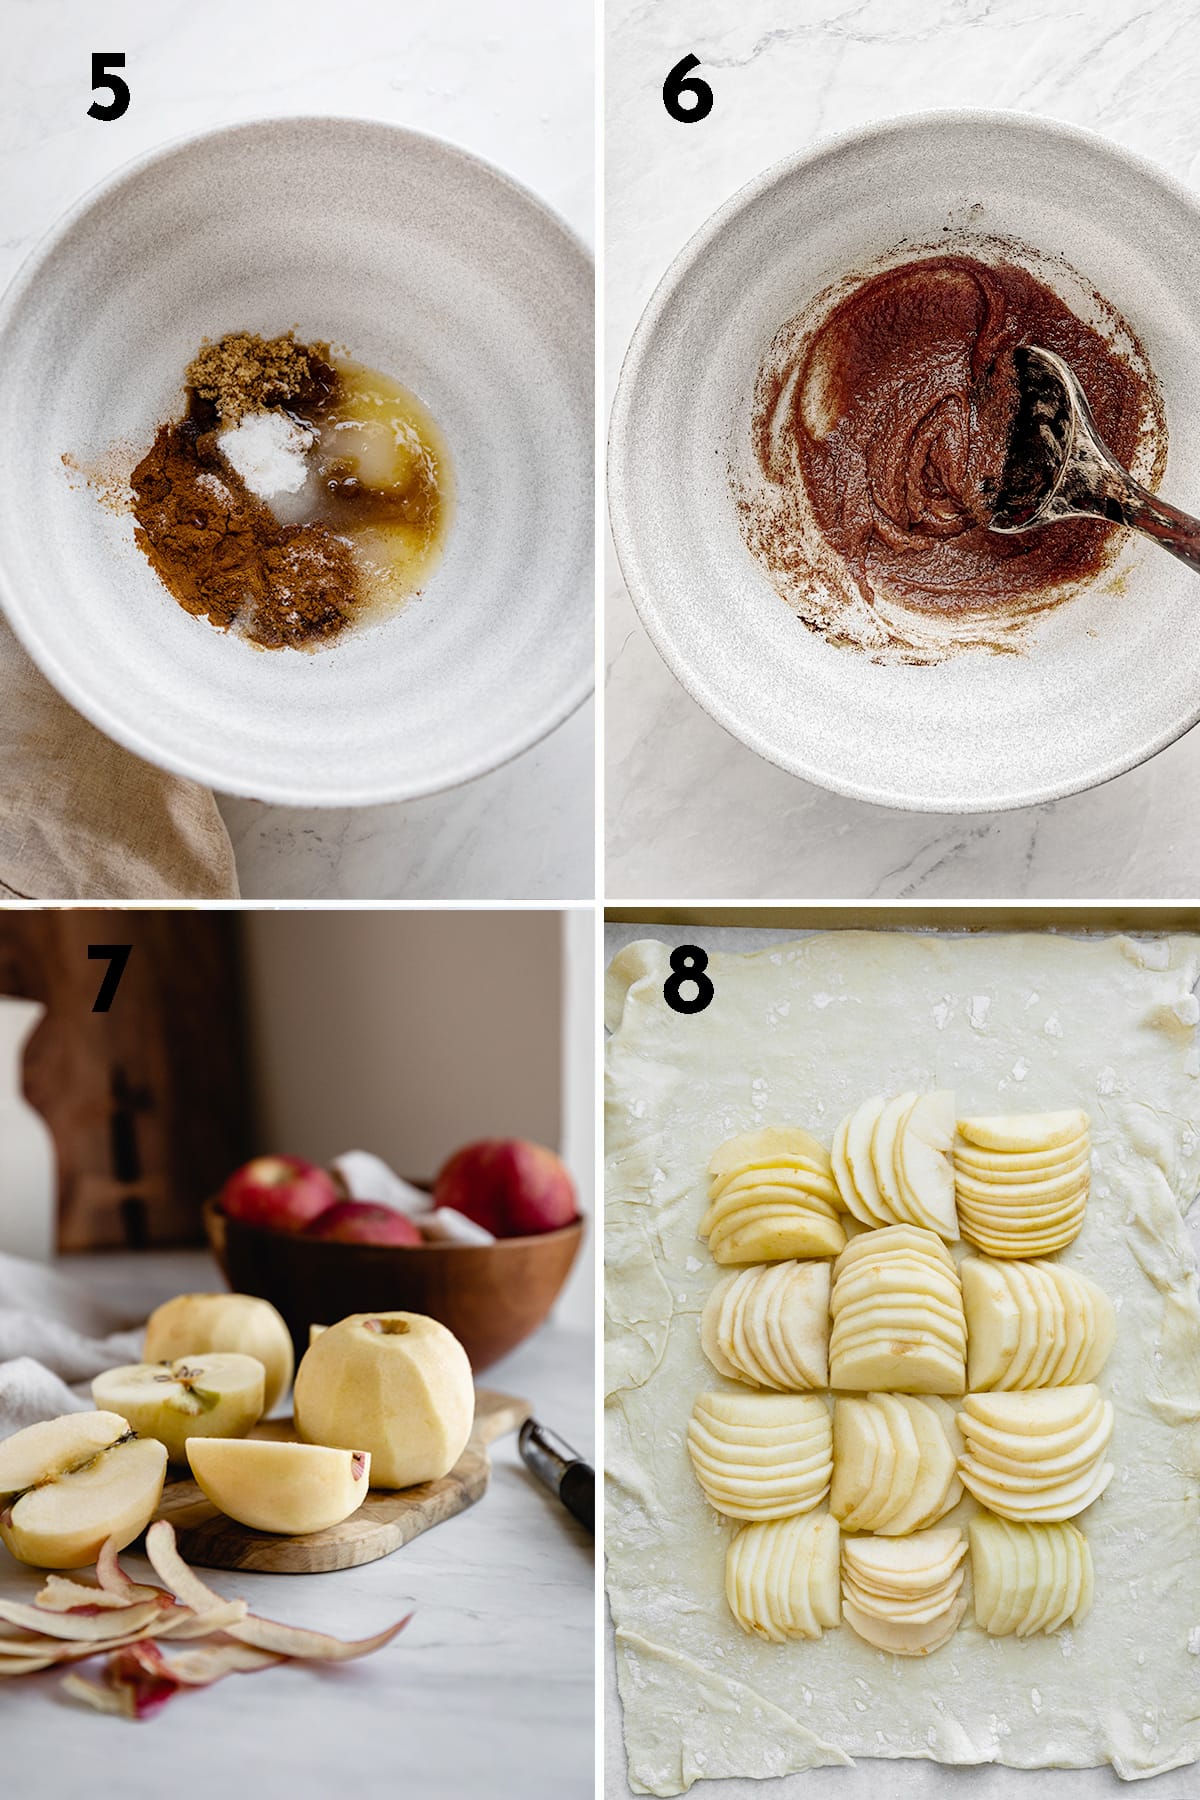 steps to make apple galette with puff pastry, combine melted butter, brown sugar, granulated sugar, cinnamon, vanilla extract, salt, lemon juice. Peel apples and thinly slice, arrange in center of pastry dough.